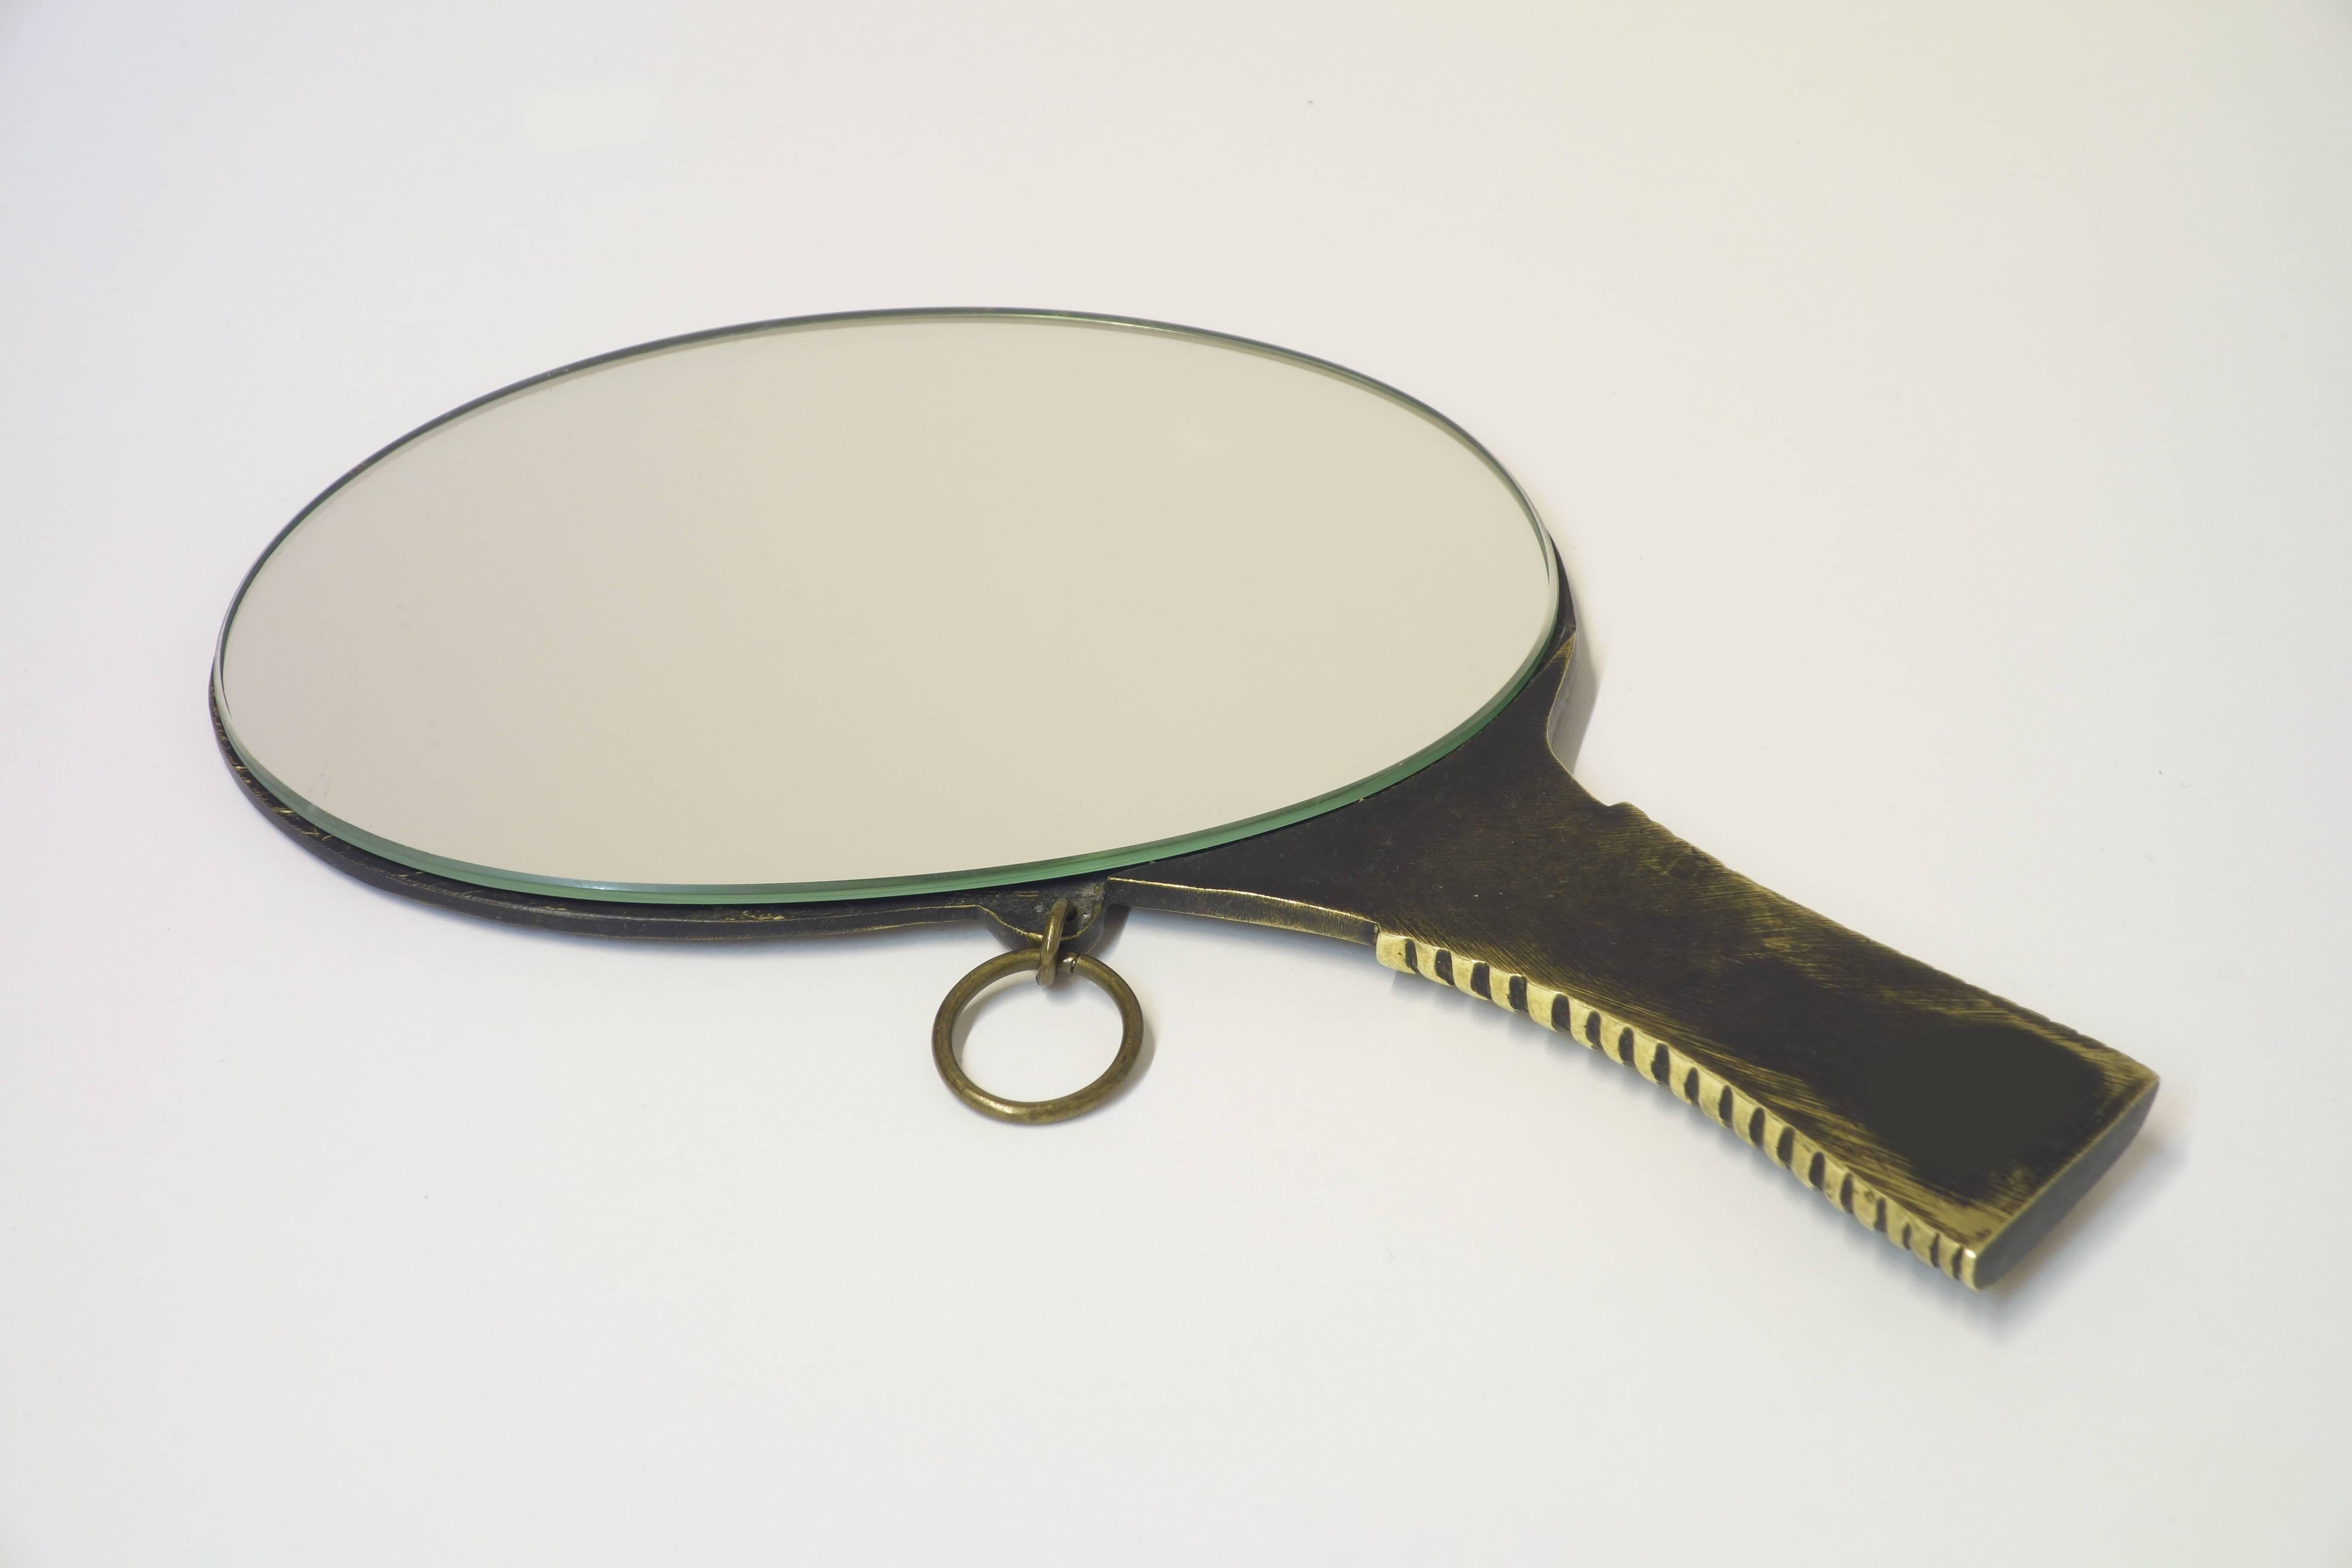 Extremely rare handmirror by Walter Bosse, design at arts level showing human presence on the mirror side and humans history on the backside. Solid brass partly blackened in excellent original condition.